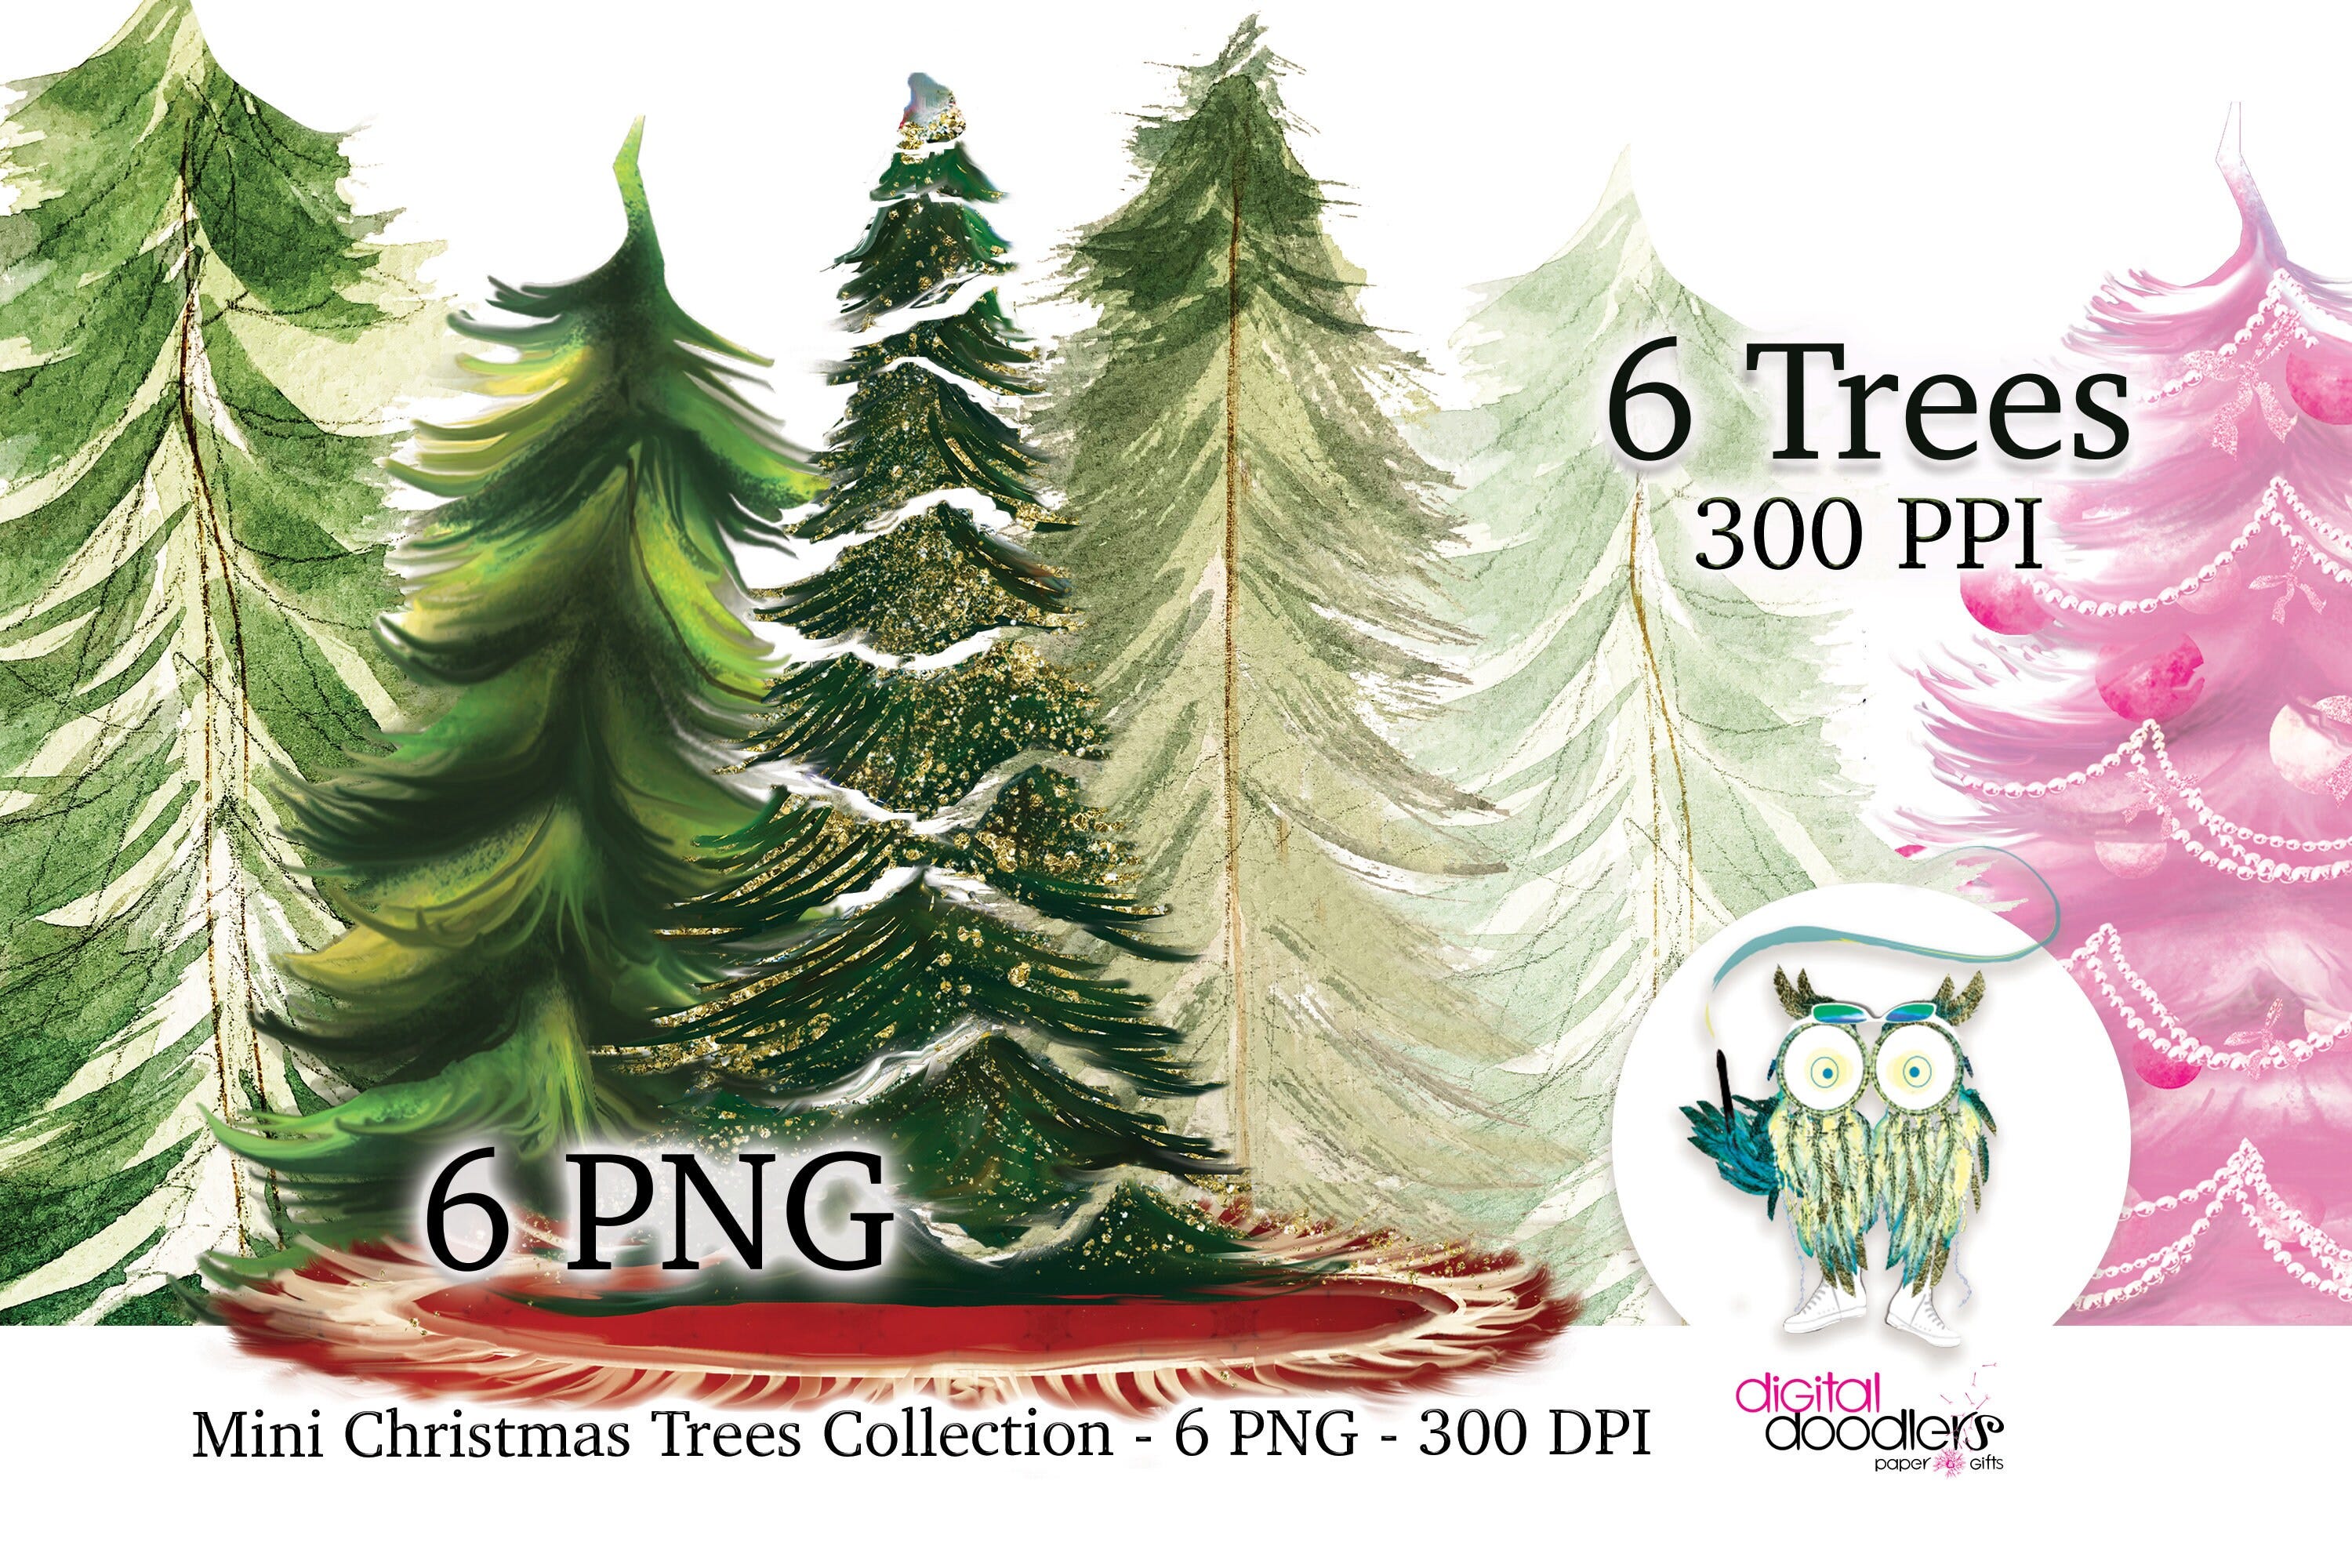 Painted Christmas Tree Illustrations, Christmas Tree Clipart, Watercolor Xmas Tree, Hunter Green Evergreen Tree PNG, Outdoors Clipart